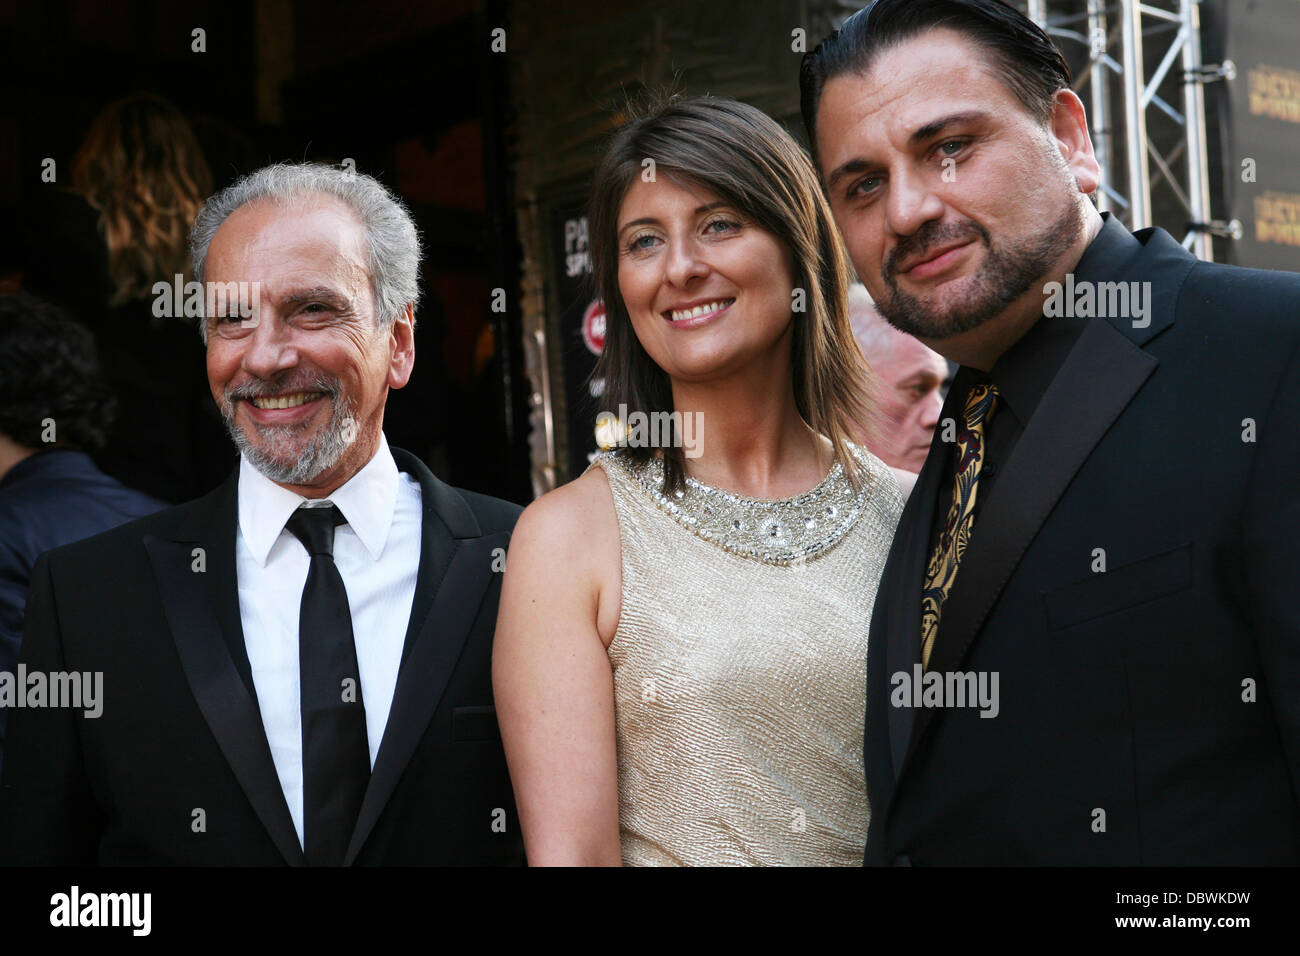 Latif Yahia and Guests Premiere of 'The Devils Double' held at Theater Tuschinski Amsterdam, The Netherlands - 05.09.11 Stock Photo